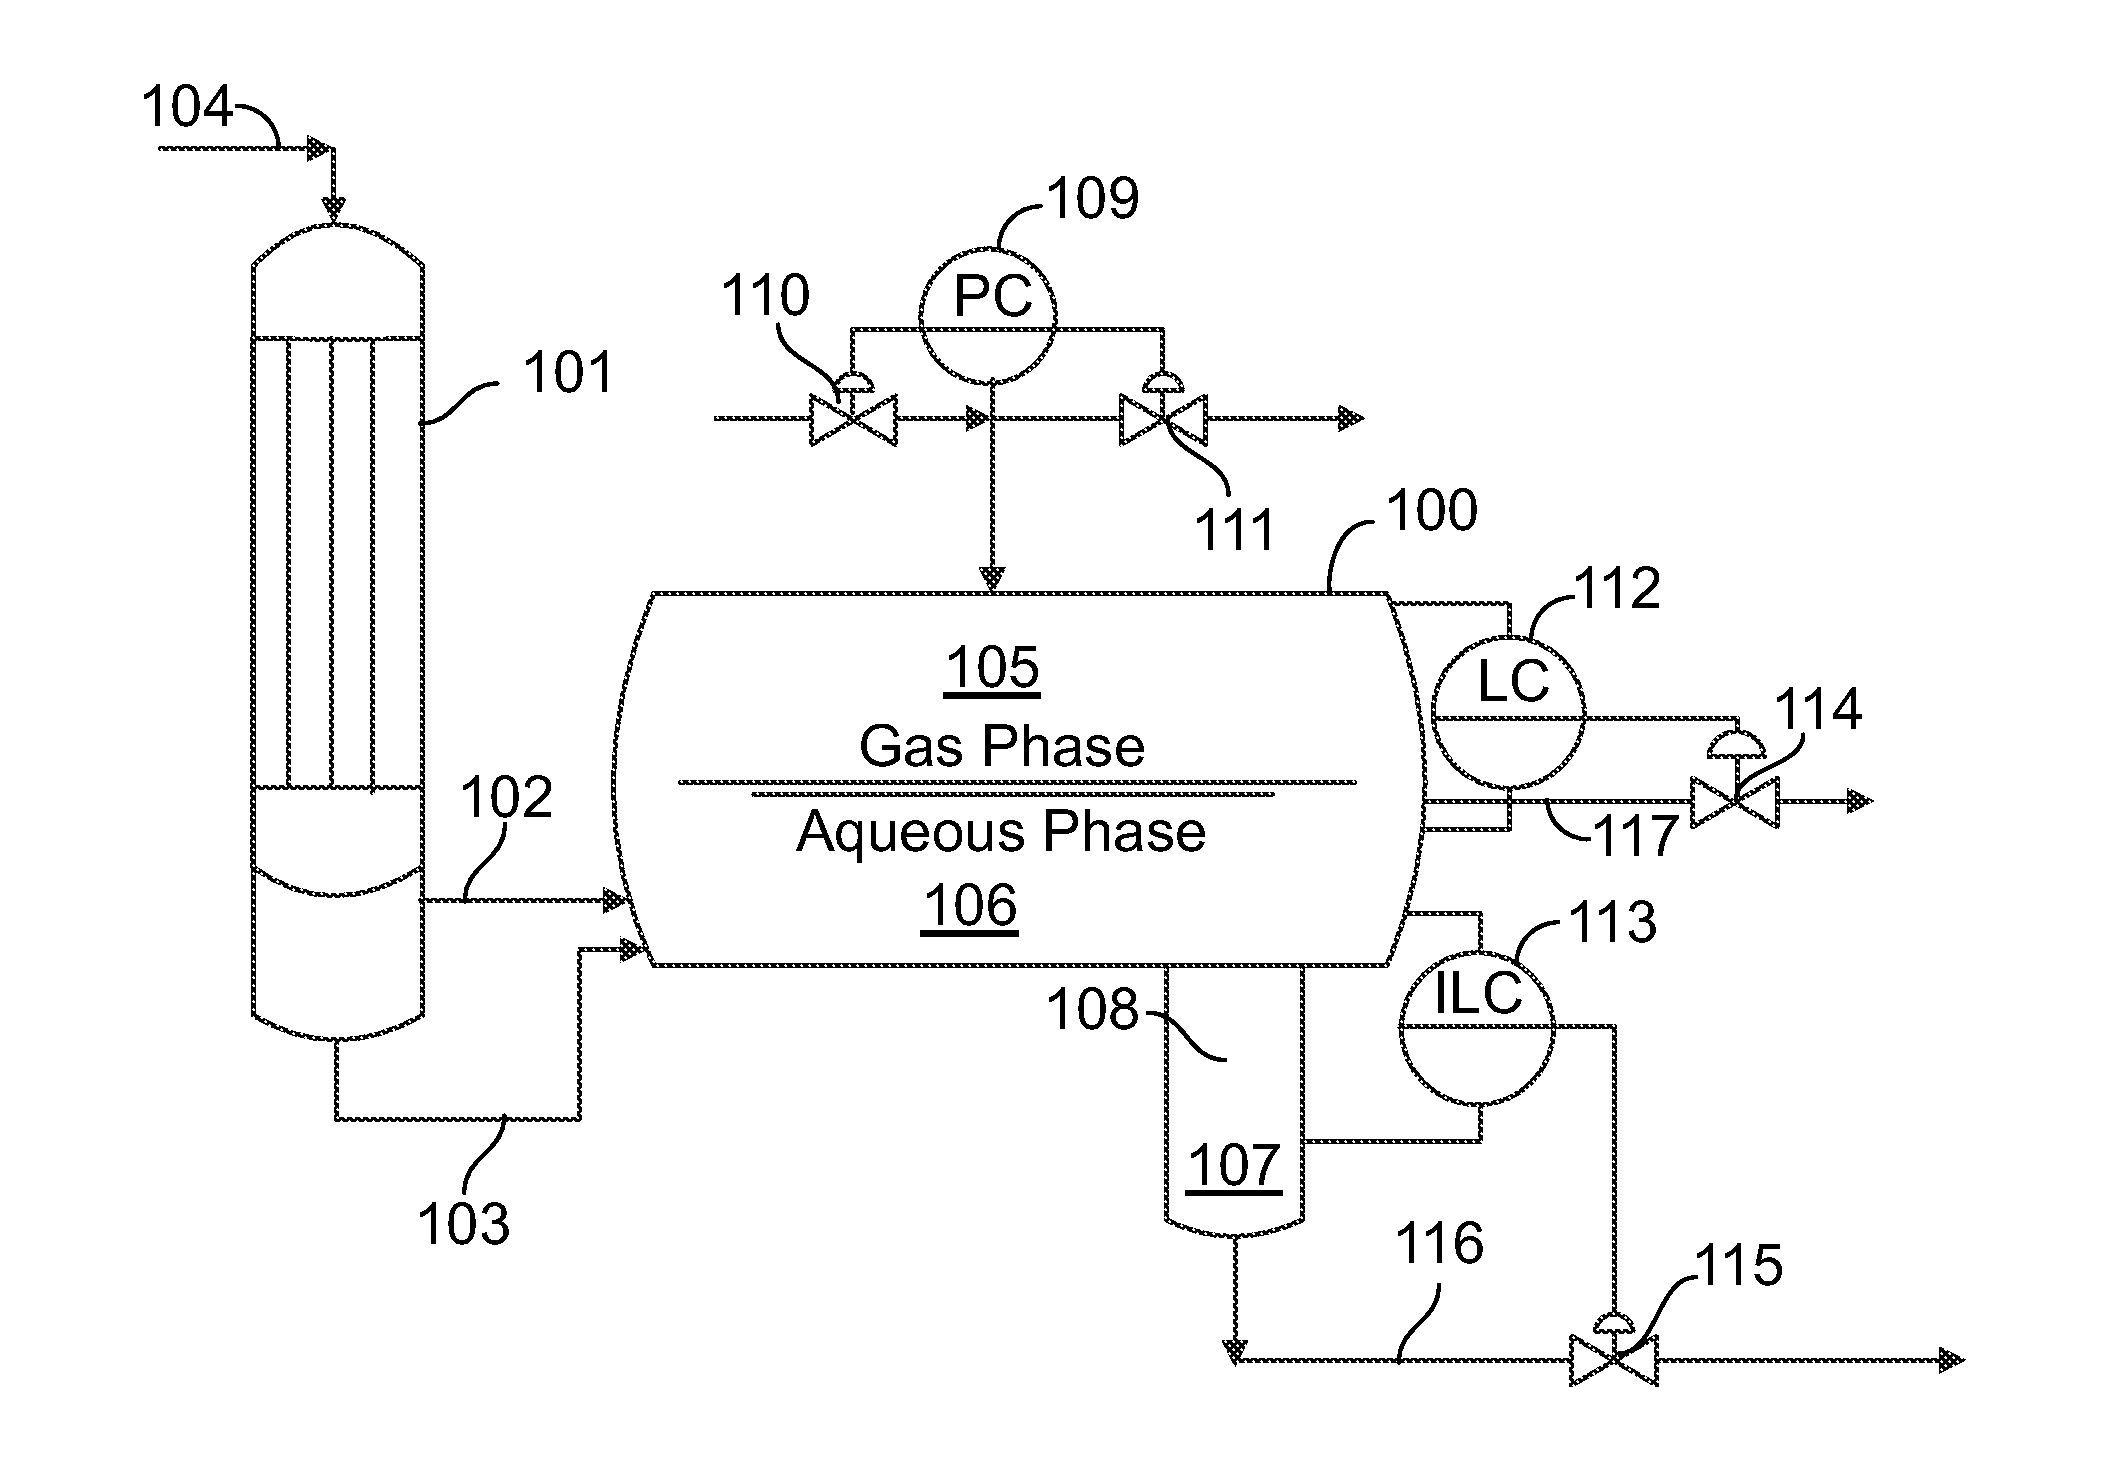 Three phase sulfur separation system with interface control